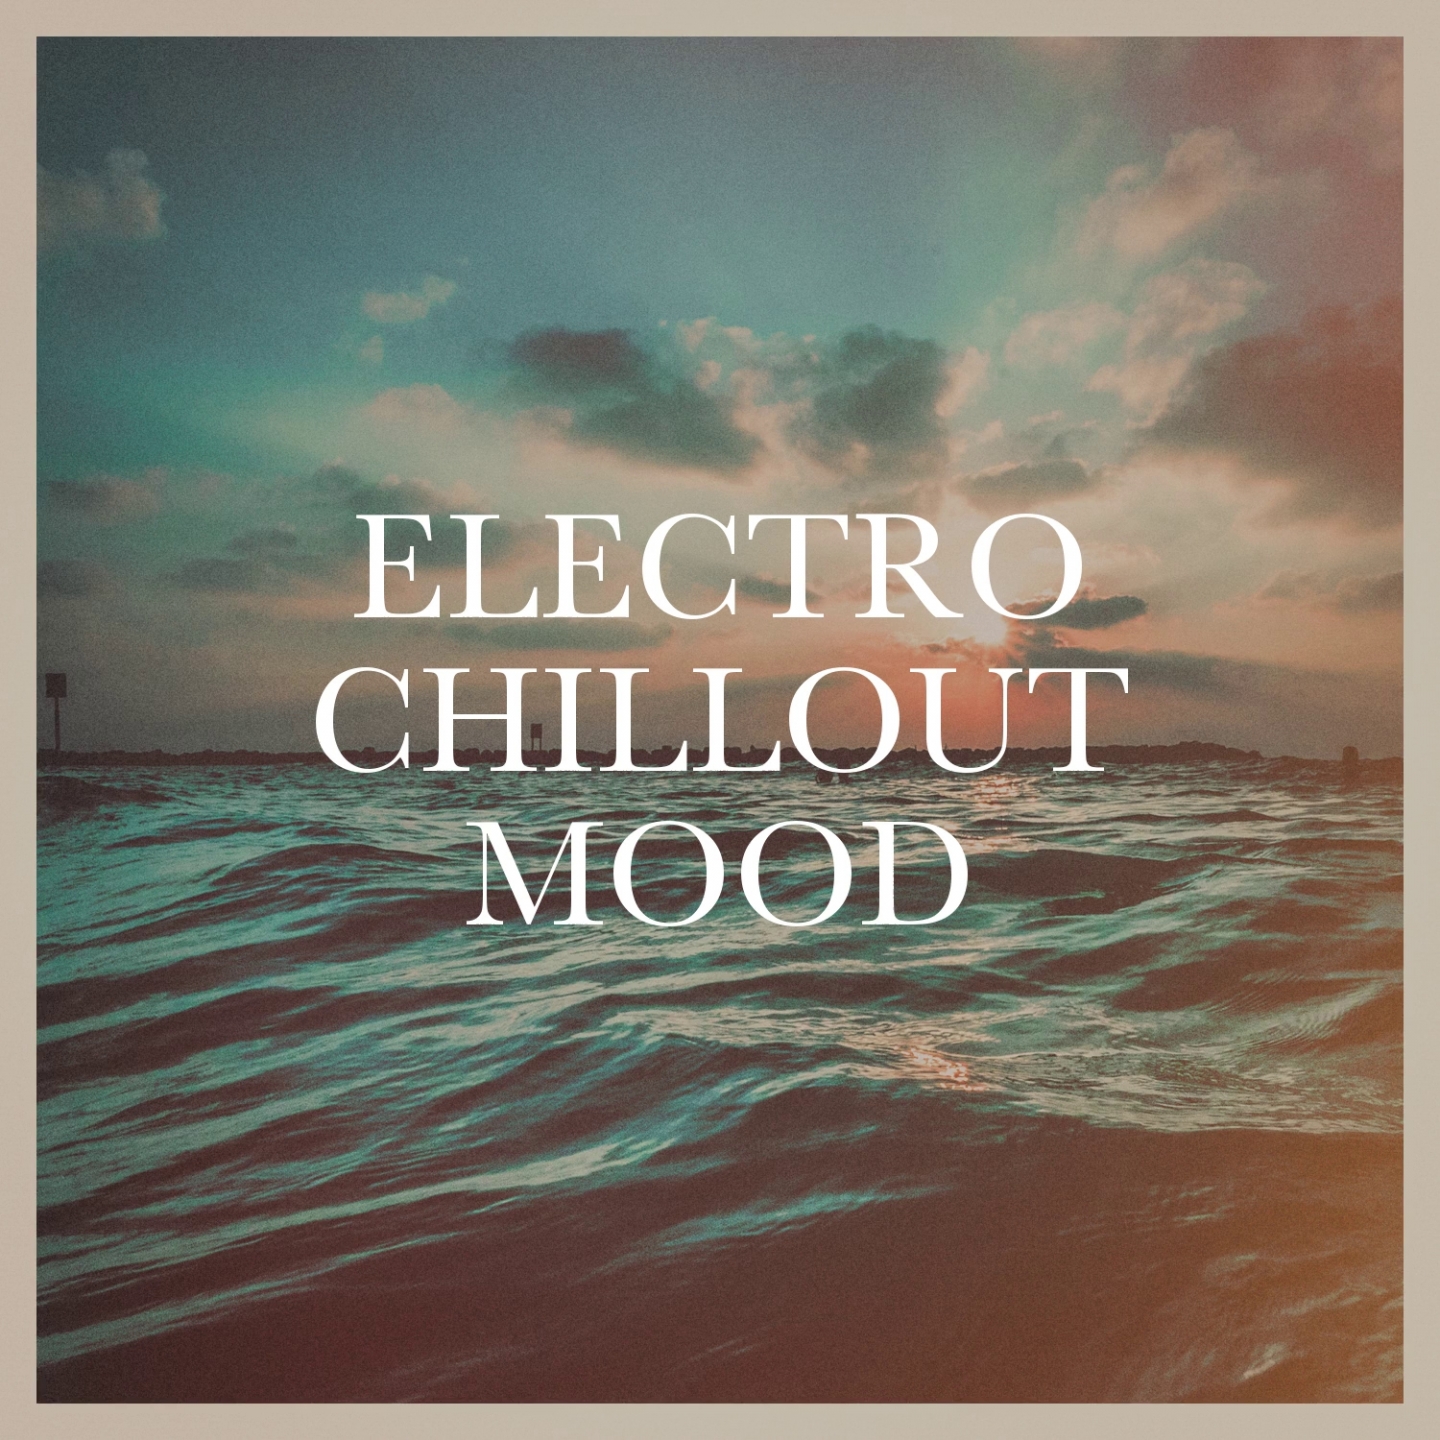 Electro Chillout Mood